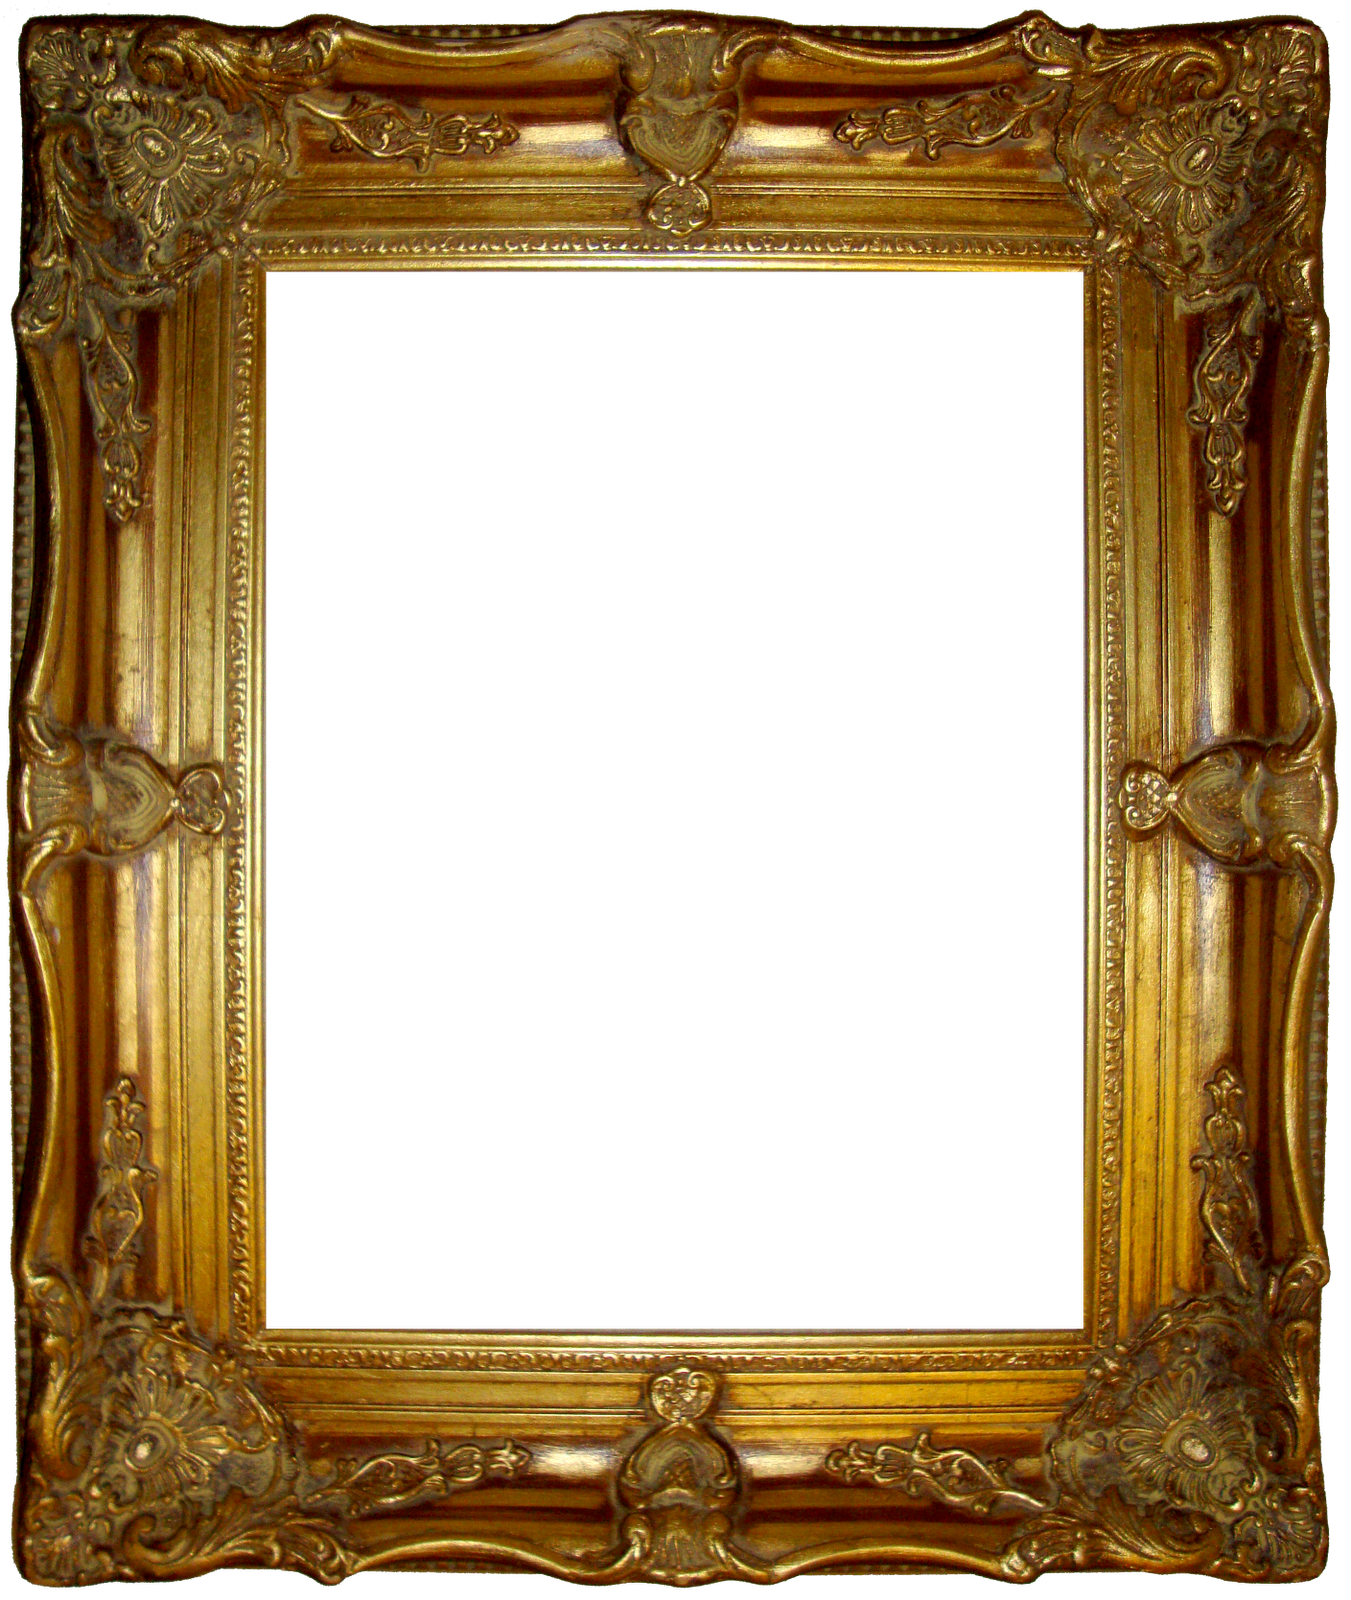 Antique Photo Frame Png Transparent Background Free Download 24597 Freeiconspng